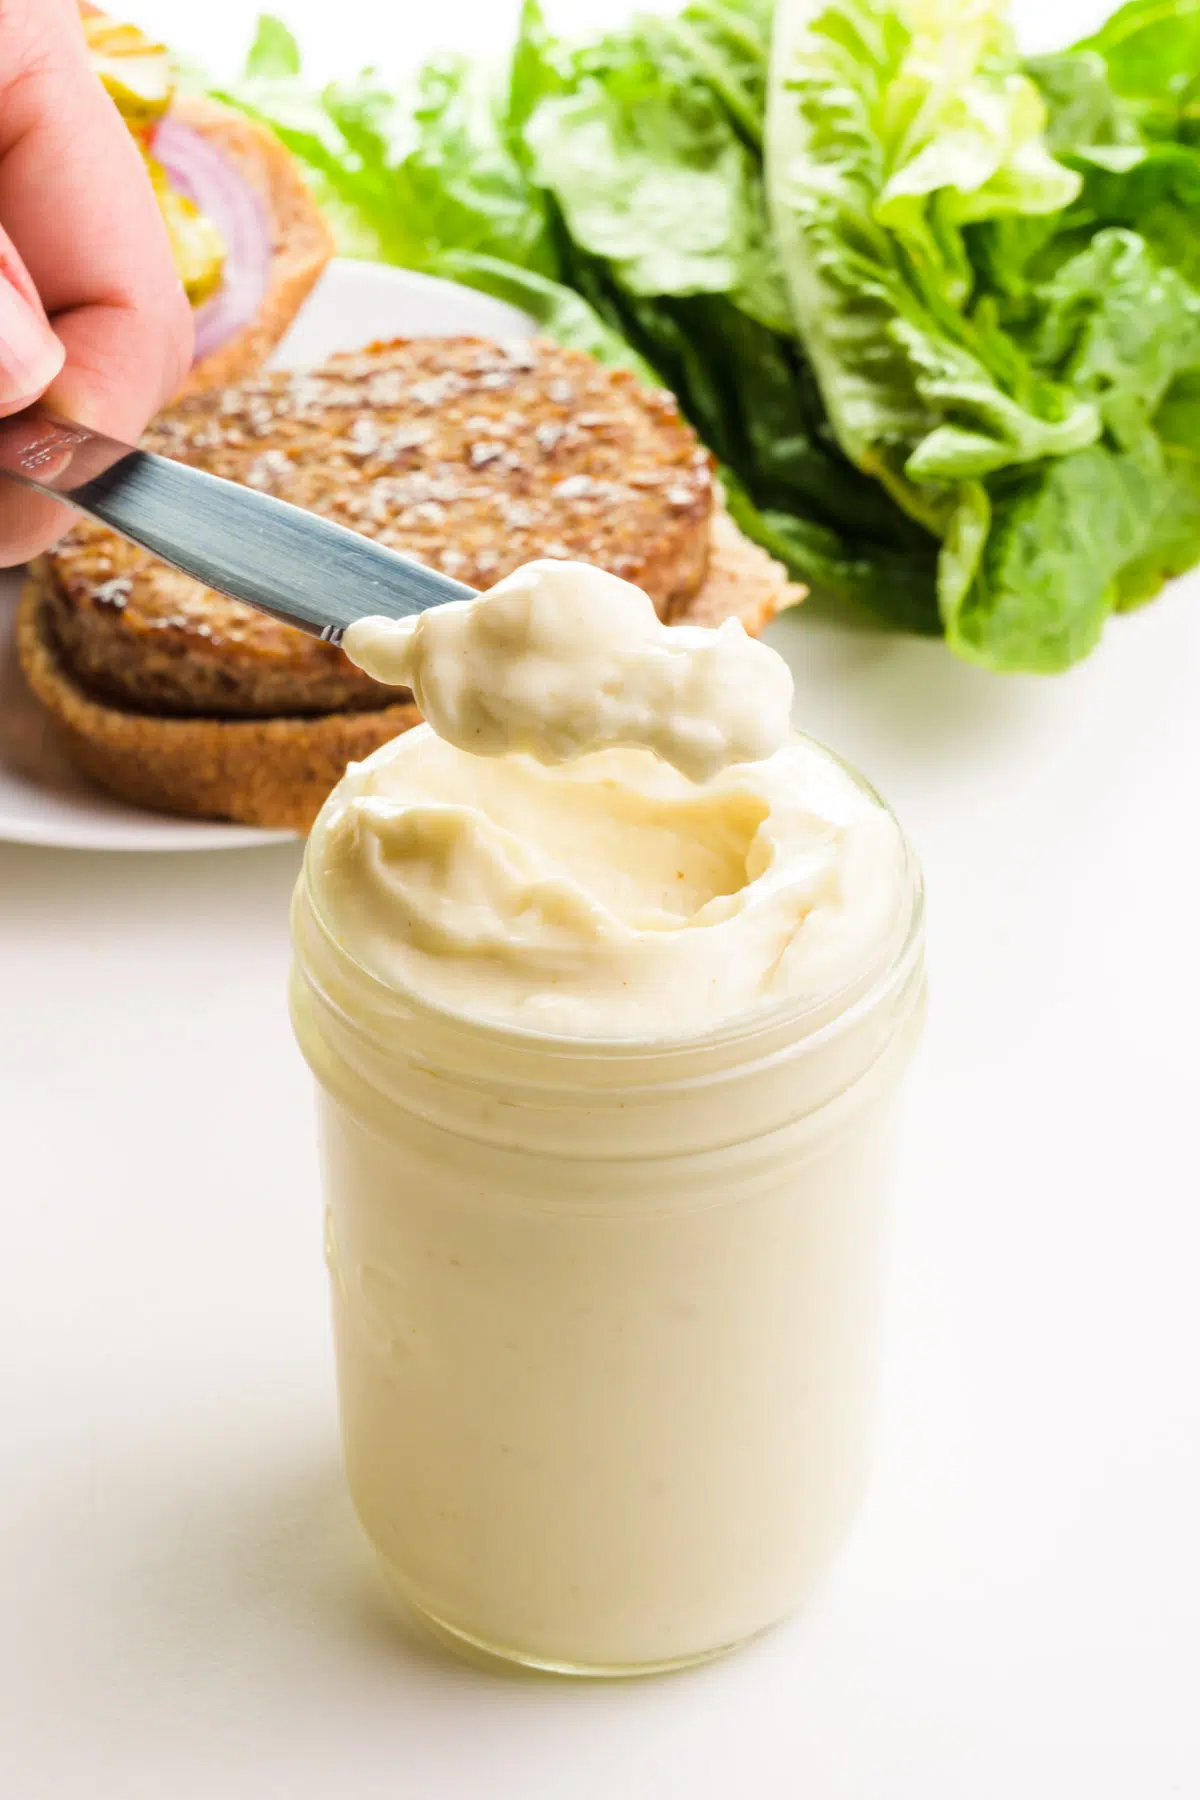 A hand holds a scoop of mayo on a knife, hovering over a jar full of it. There is a veggie burger and lettuce in the background.